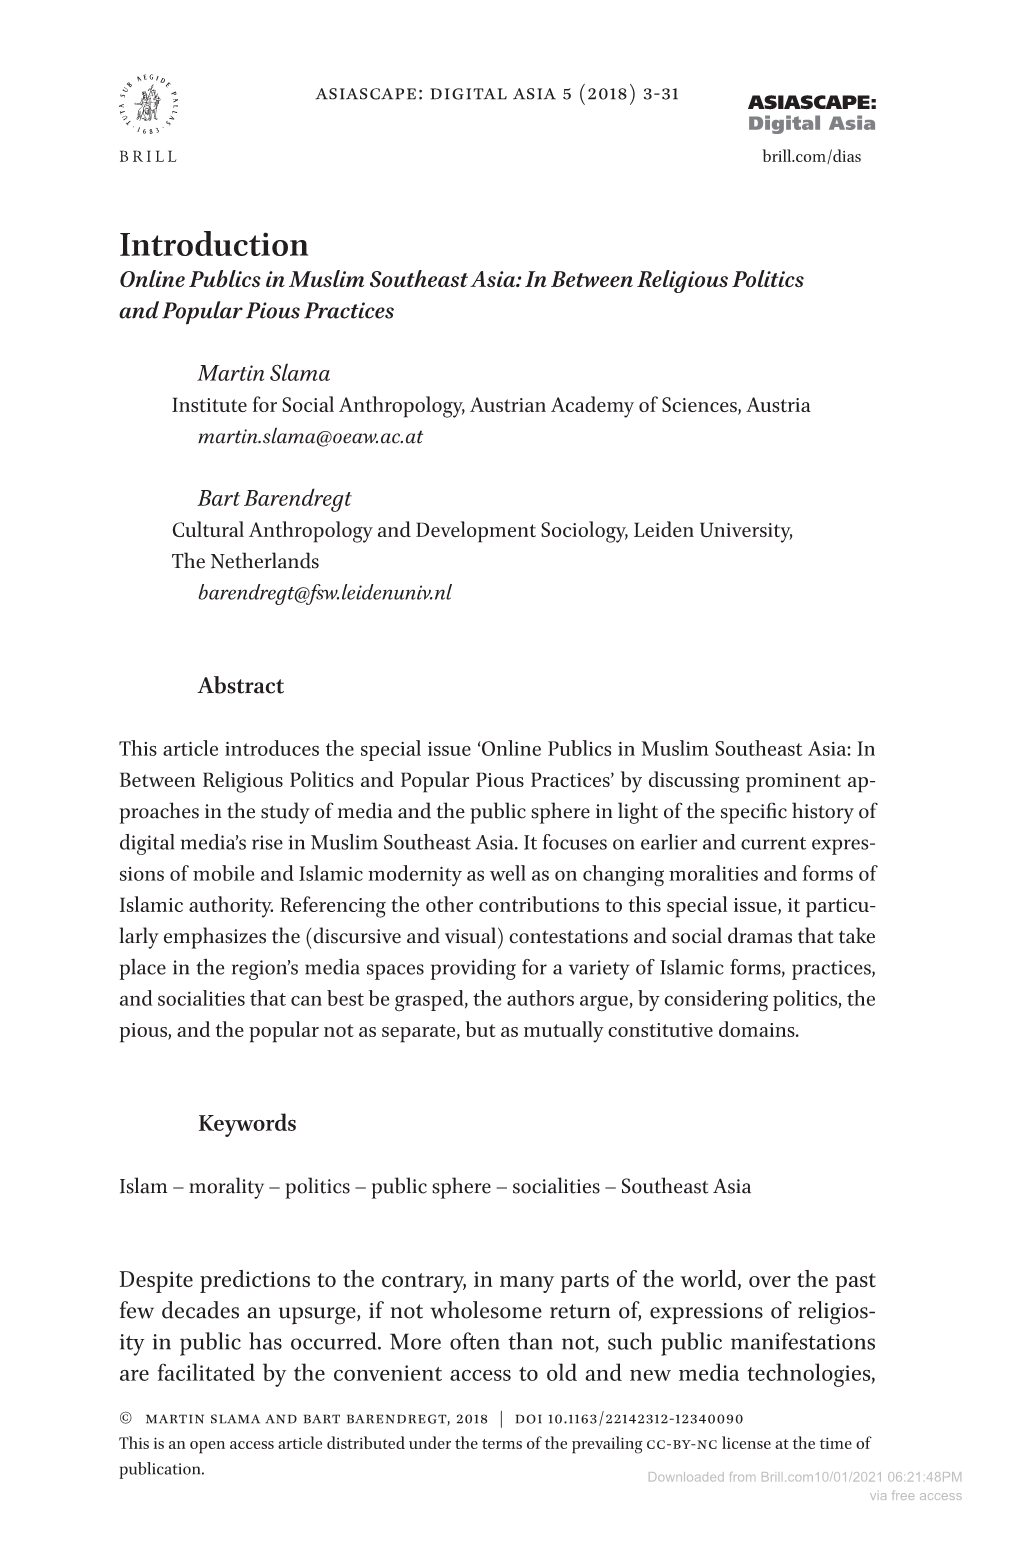 Introduction Online Publics in Muslim Southeast Asia: in Between Religious Politics and Popular Pious Practices